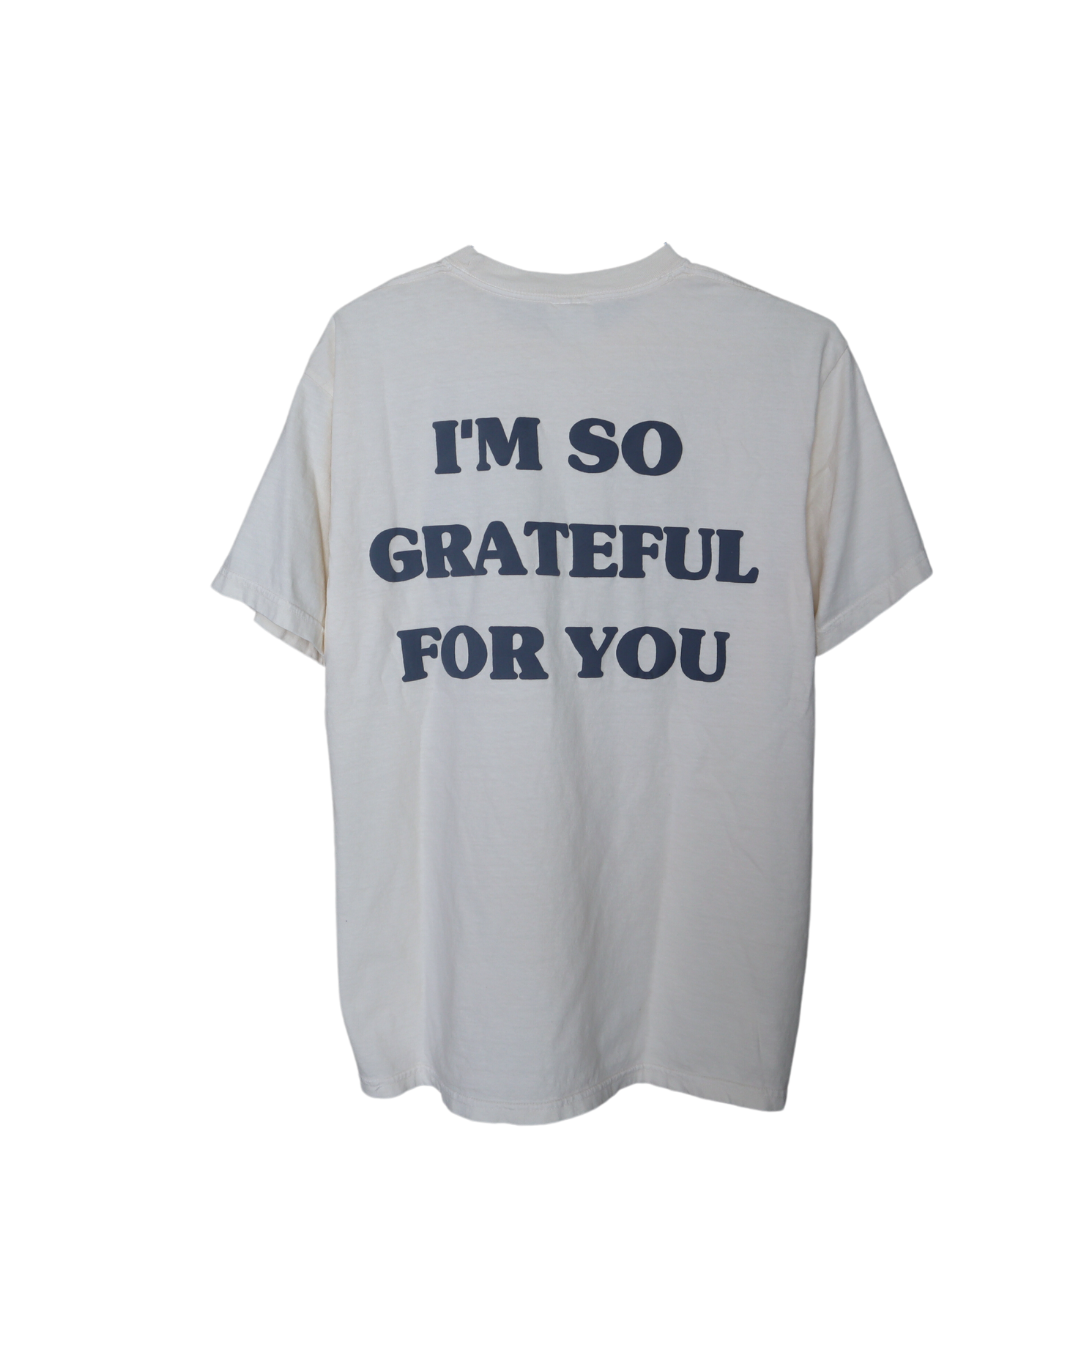 'GRATEFUL FOR YOU' cream tee